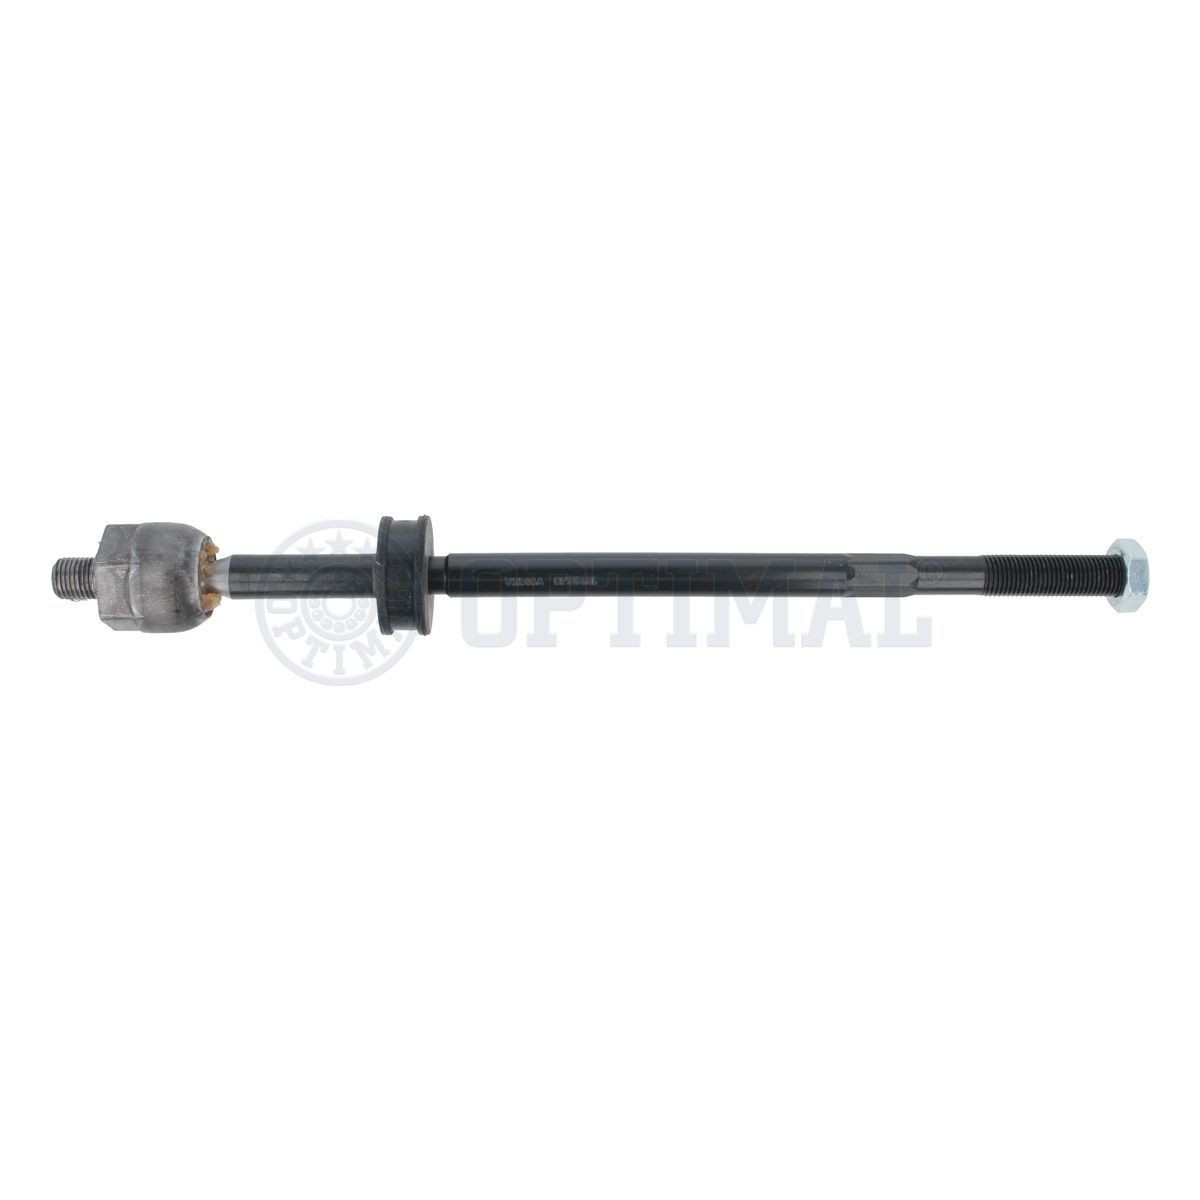 OPTIMAL Front Axle Left, Front Axle Right, M14 x 1,50 RHT M, for vehicles with power steering Tie rod axle joint G2-048 buy